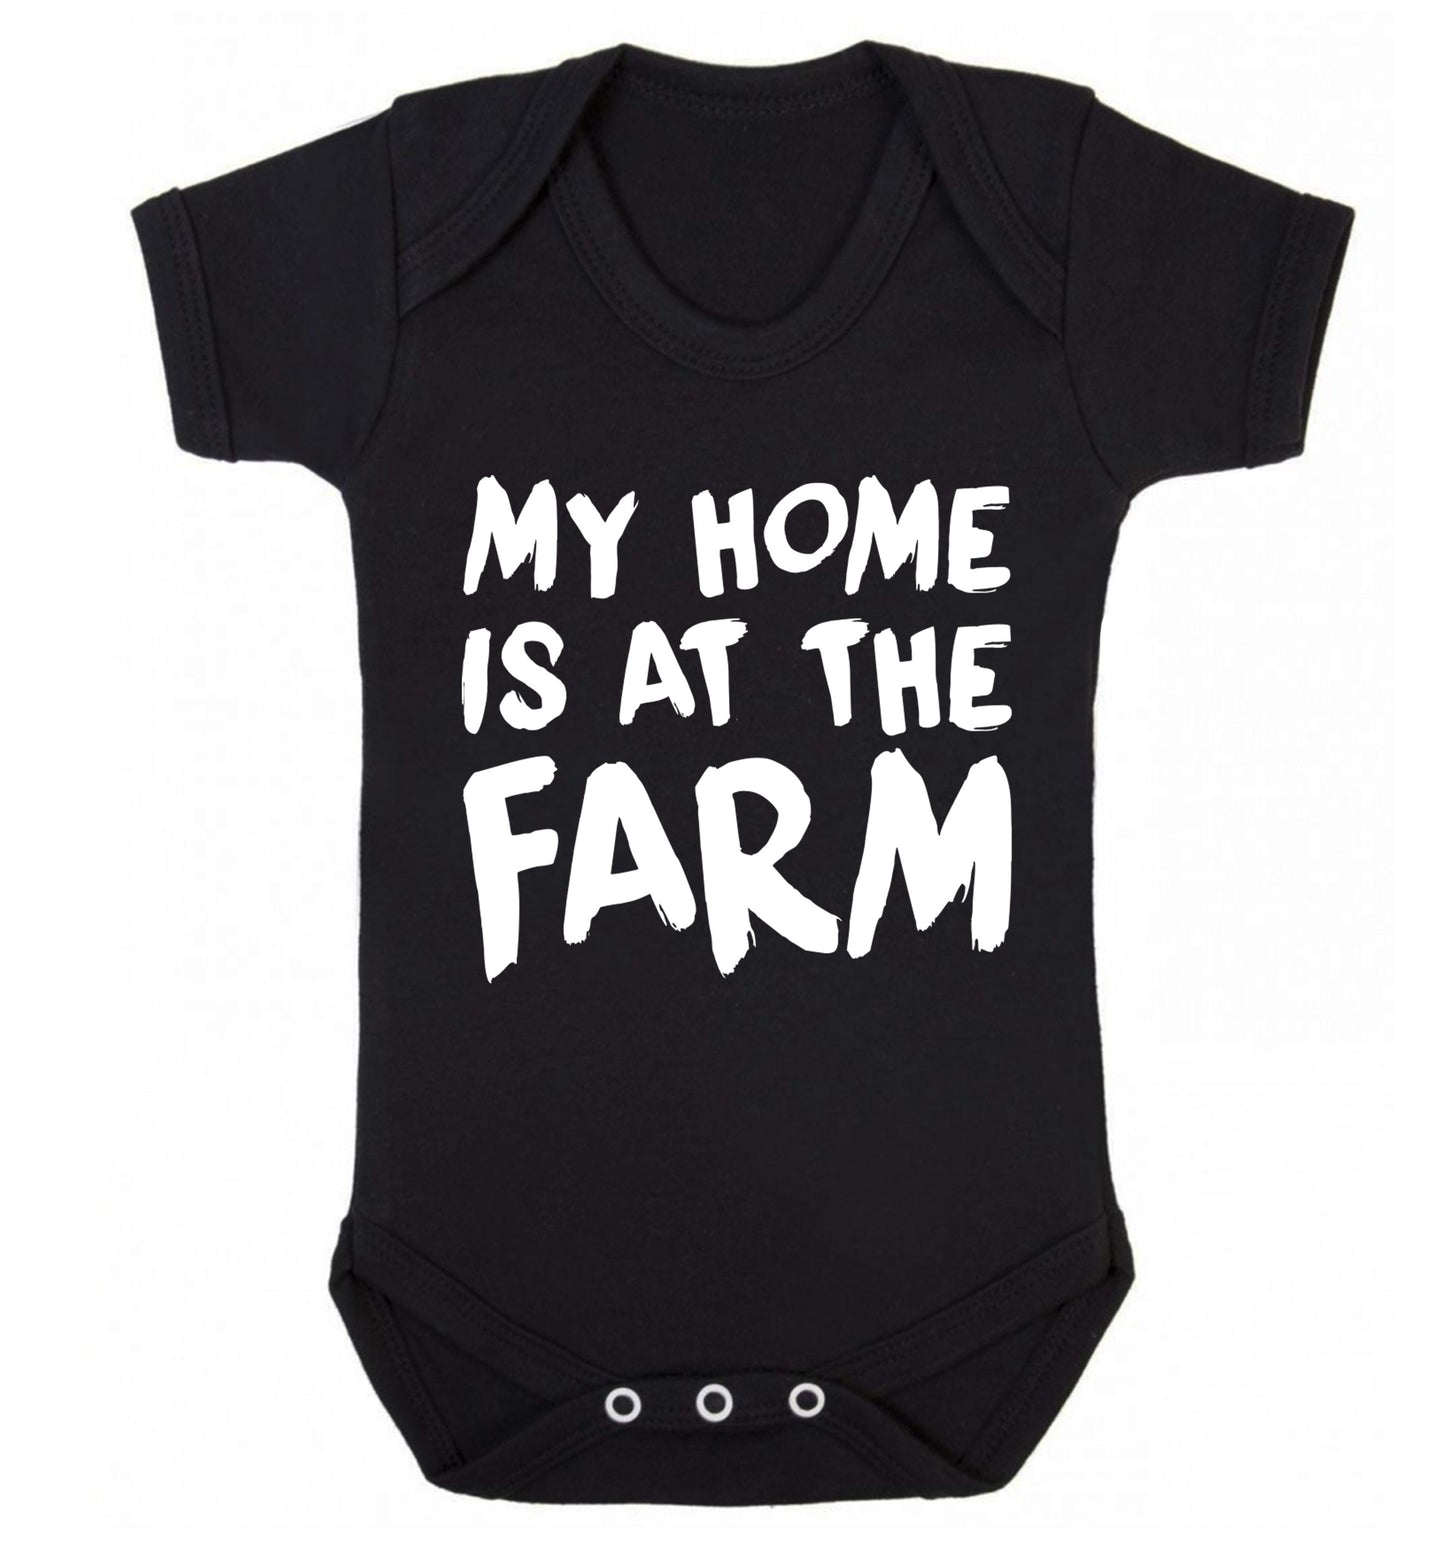 My home is at the farm Baby Vest black 18-24 months